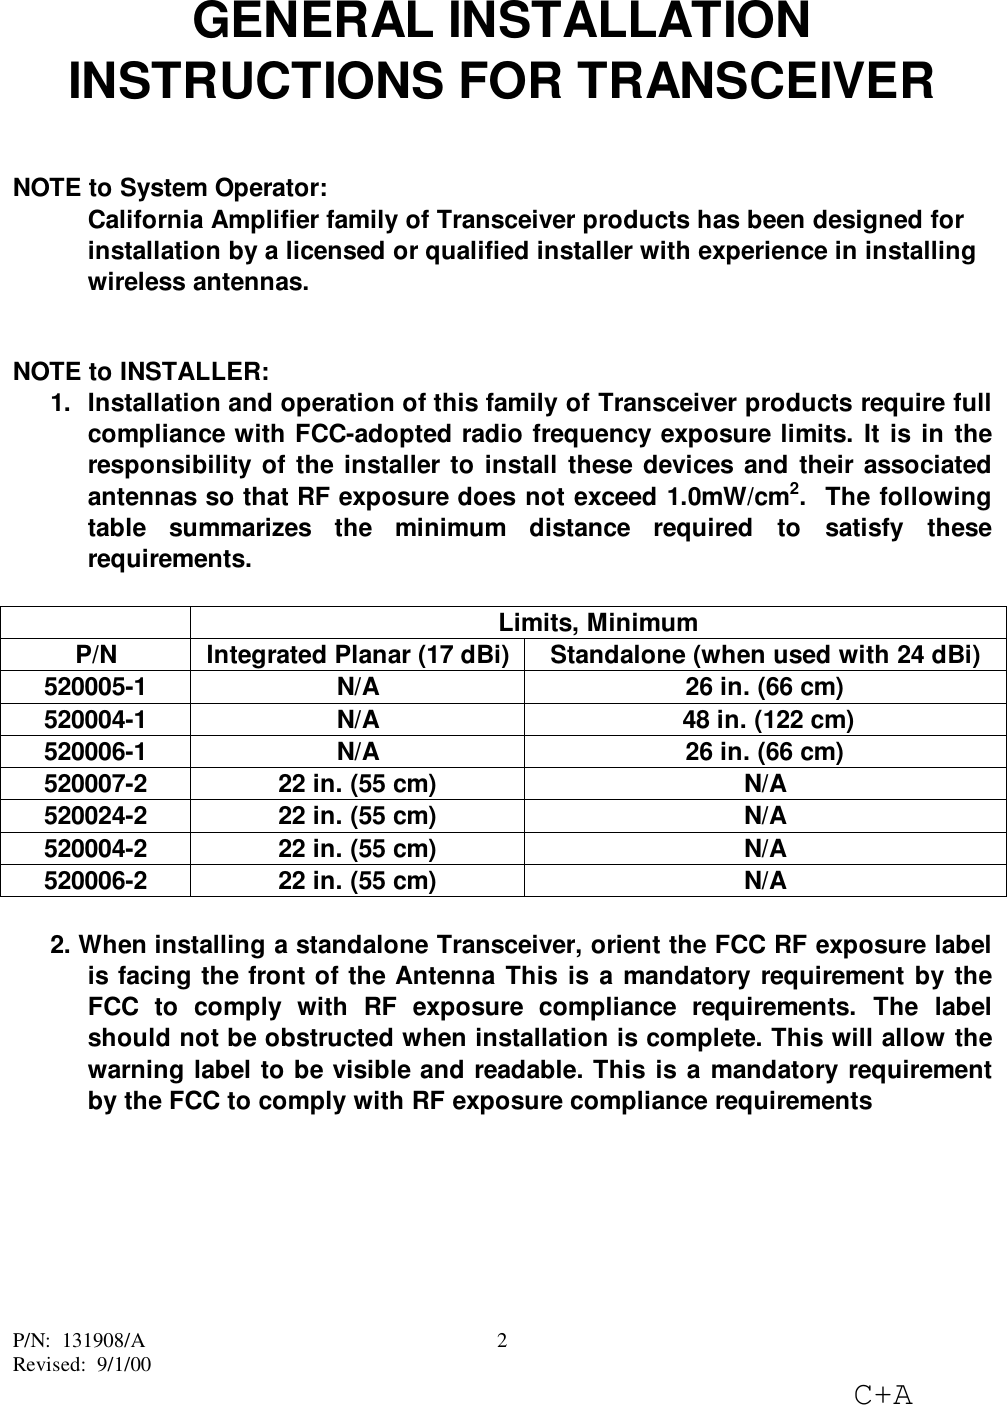 P/N:  131908/ARevised:  9/1/00C+A2GENERAL INSTALLATIONINSTRUCTIONS FOR TRANSCEIVERNOTE to System Operator:California Amplifier family of Transceiver products has been designed forinstallation by a licensed or qualified installer with experience in installingwireless antennas.NOTE to INSTALLER:1.  Installation and operation of this family of Transceiver products require fullcompliance with FCC-adopted radio frequency exposure limits. It is in theresponsibility of the installer to install these devices and their associatedantennas so that RF exposure does not exceed 1.0mW/cm2.  The followingtable summarizes the minimum distance required to satisfy theserequirements.Limits, MinimumP/N Integrated Planar (17 dBi) Standalone (when used with 24 dBi)520005-1 N/A 26 in. (66 cm)520004-1 N/A  48 in. (122 cm)520006-1 N/A 26 in. (66 cm)520007-2 22 in. (55 cm) N/A520024-2 22 in. (55 cm) N/A520004-2 22 in. (55 cm) N/A520006-2 22 in. (55 cm) N/A2. When installing a standalone Transceiver, orient the FCC RF exposure labelis facing the front of the Antenna This is a mandatory requirement by theFCC to comply with RF exposure compliance requirements. The labelshould not be obstructed when installation is complete. This will allow thewarning label to be visible and readable. This is a mandatory requirementby the FCC to comply with RF exposure compliance requirements